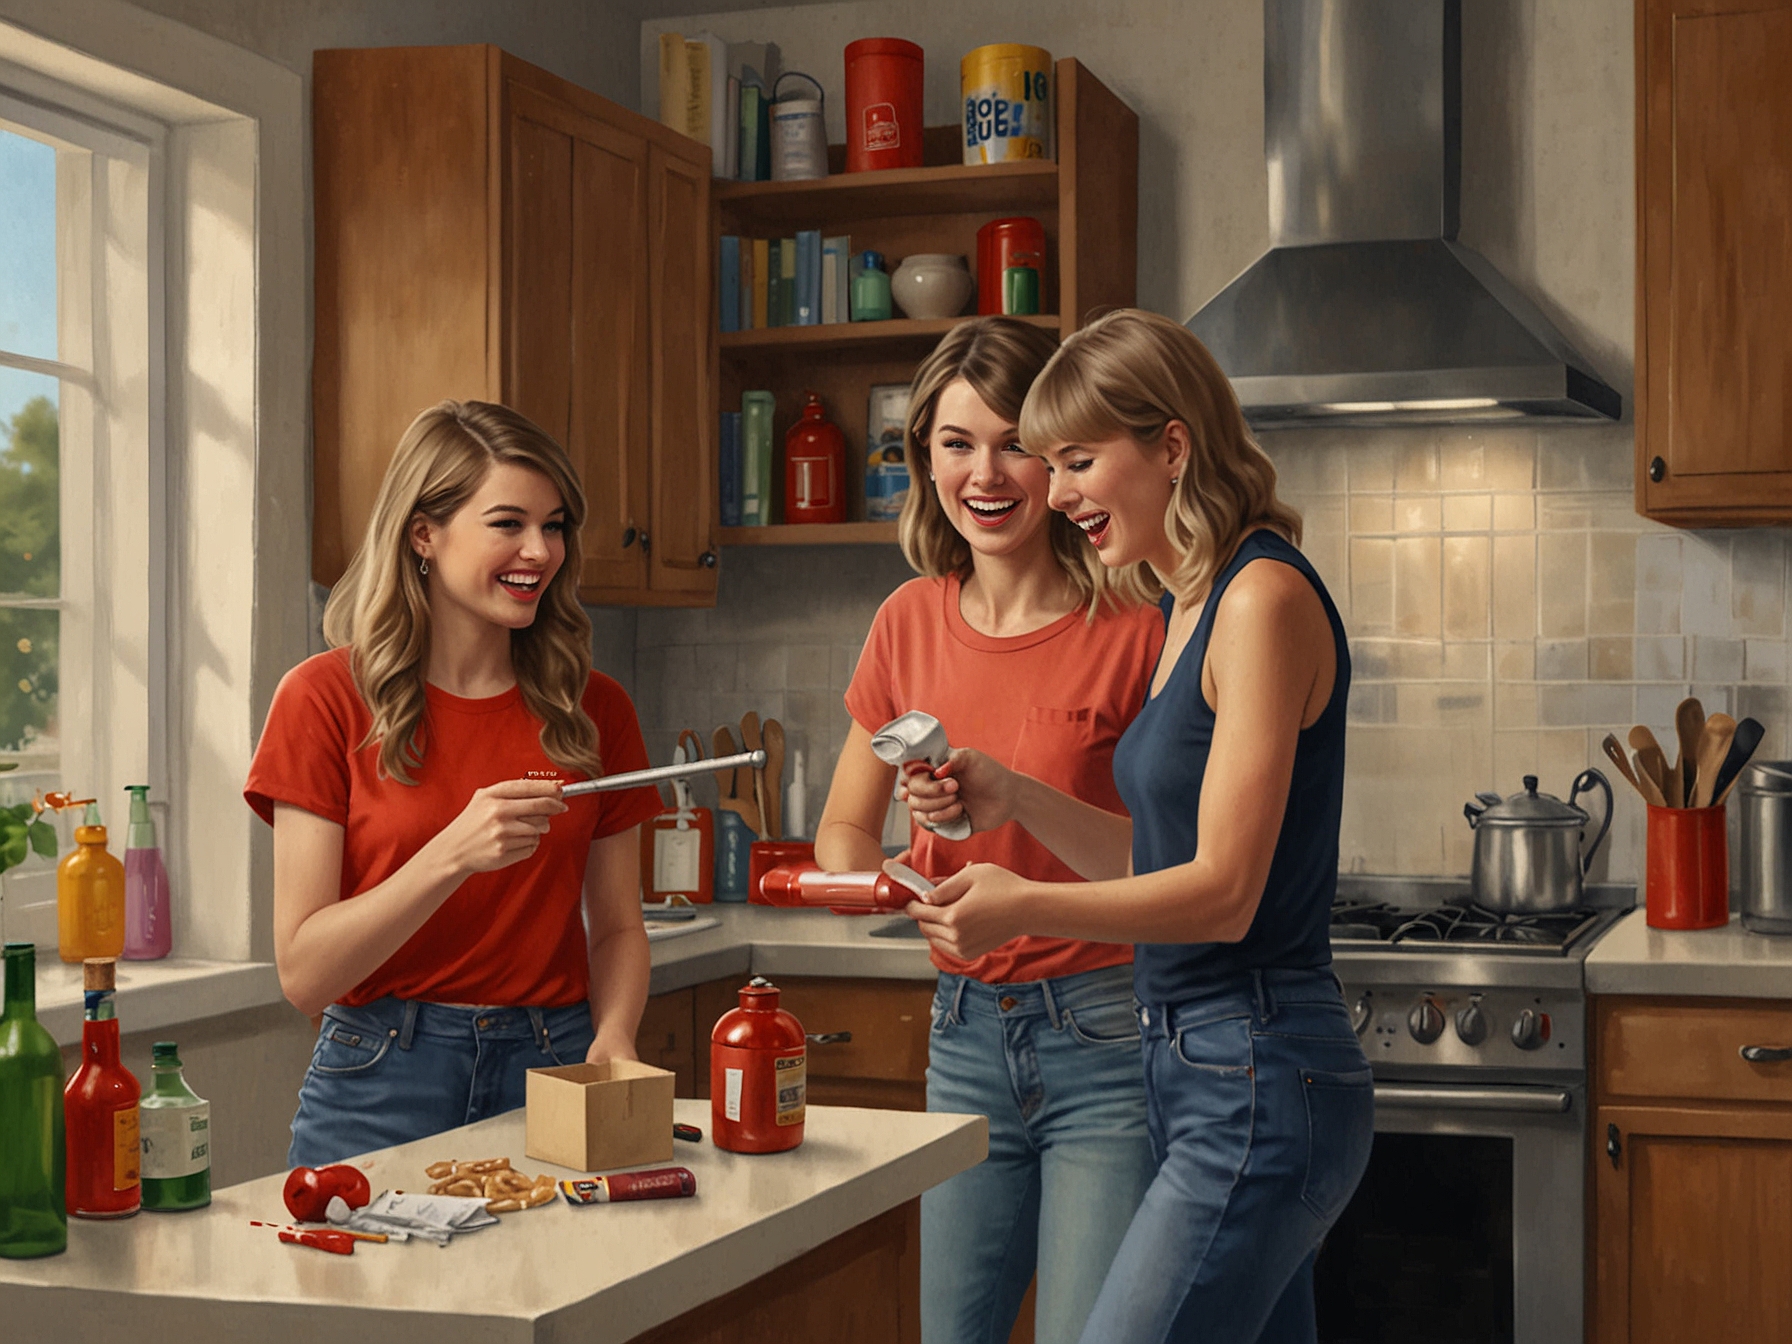 Gracie Abrams and Taylor Swift are captured in a lighthearted moment in Abrams' kitchen, with Swift holding a fire extinguisher and smiling after successfully putting out a small fire.